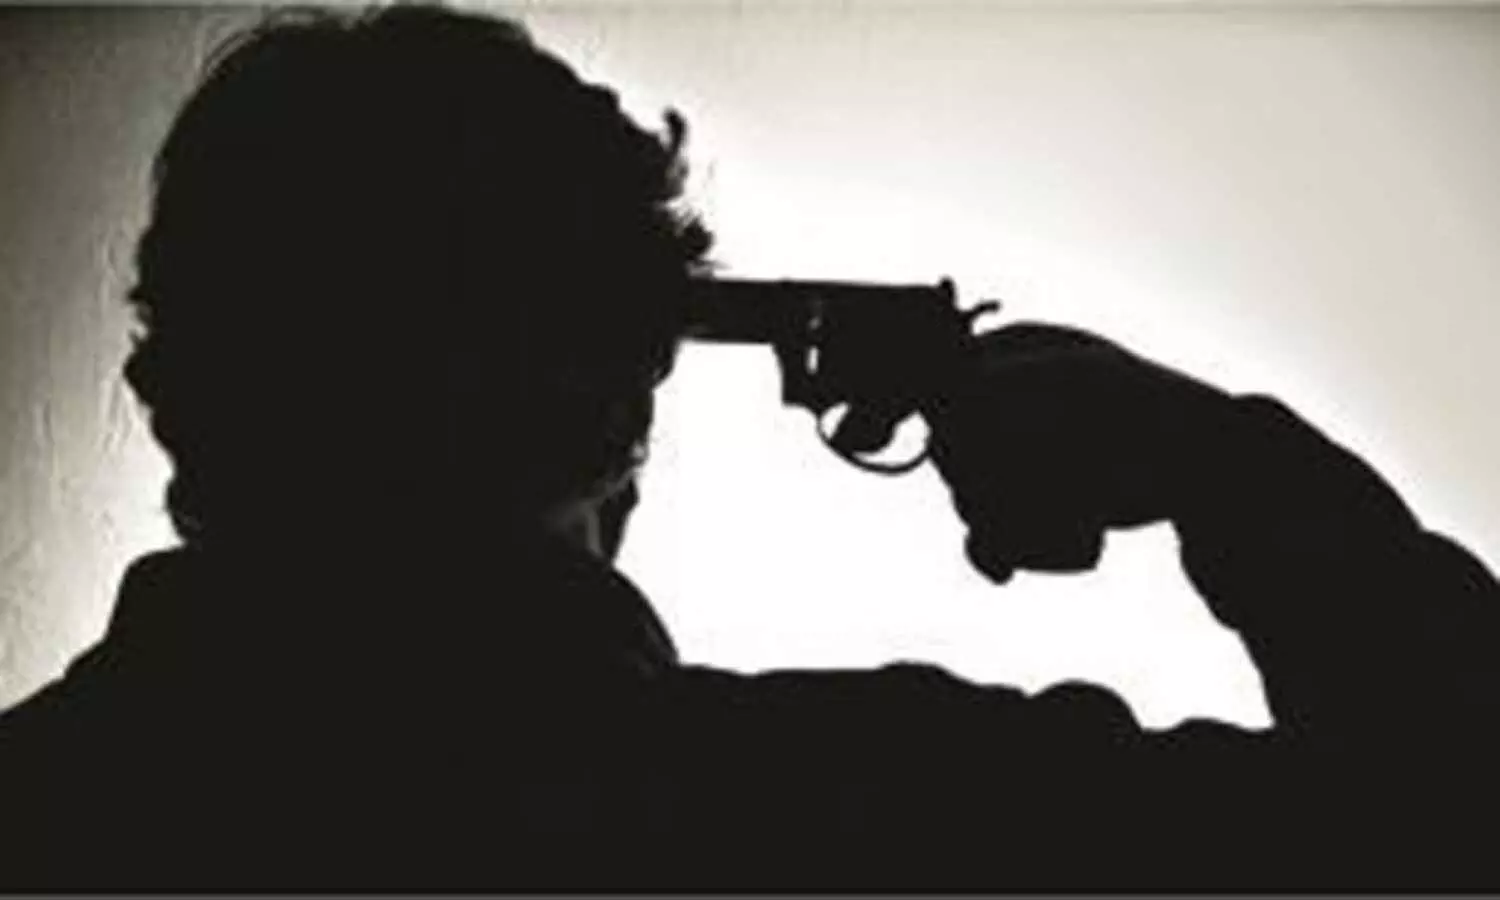 Haryana: Final Year MBBS Student shoots Self with Fathers Gun, dies